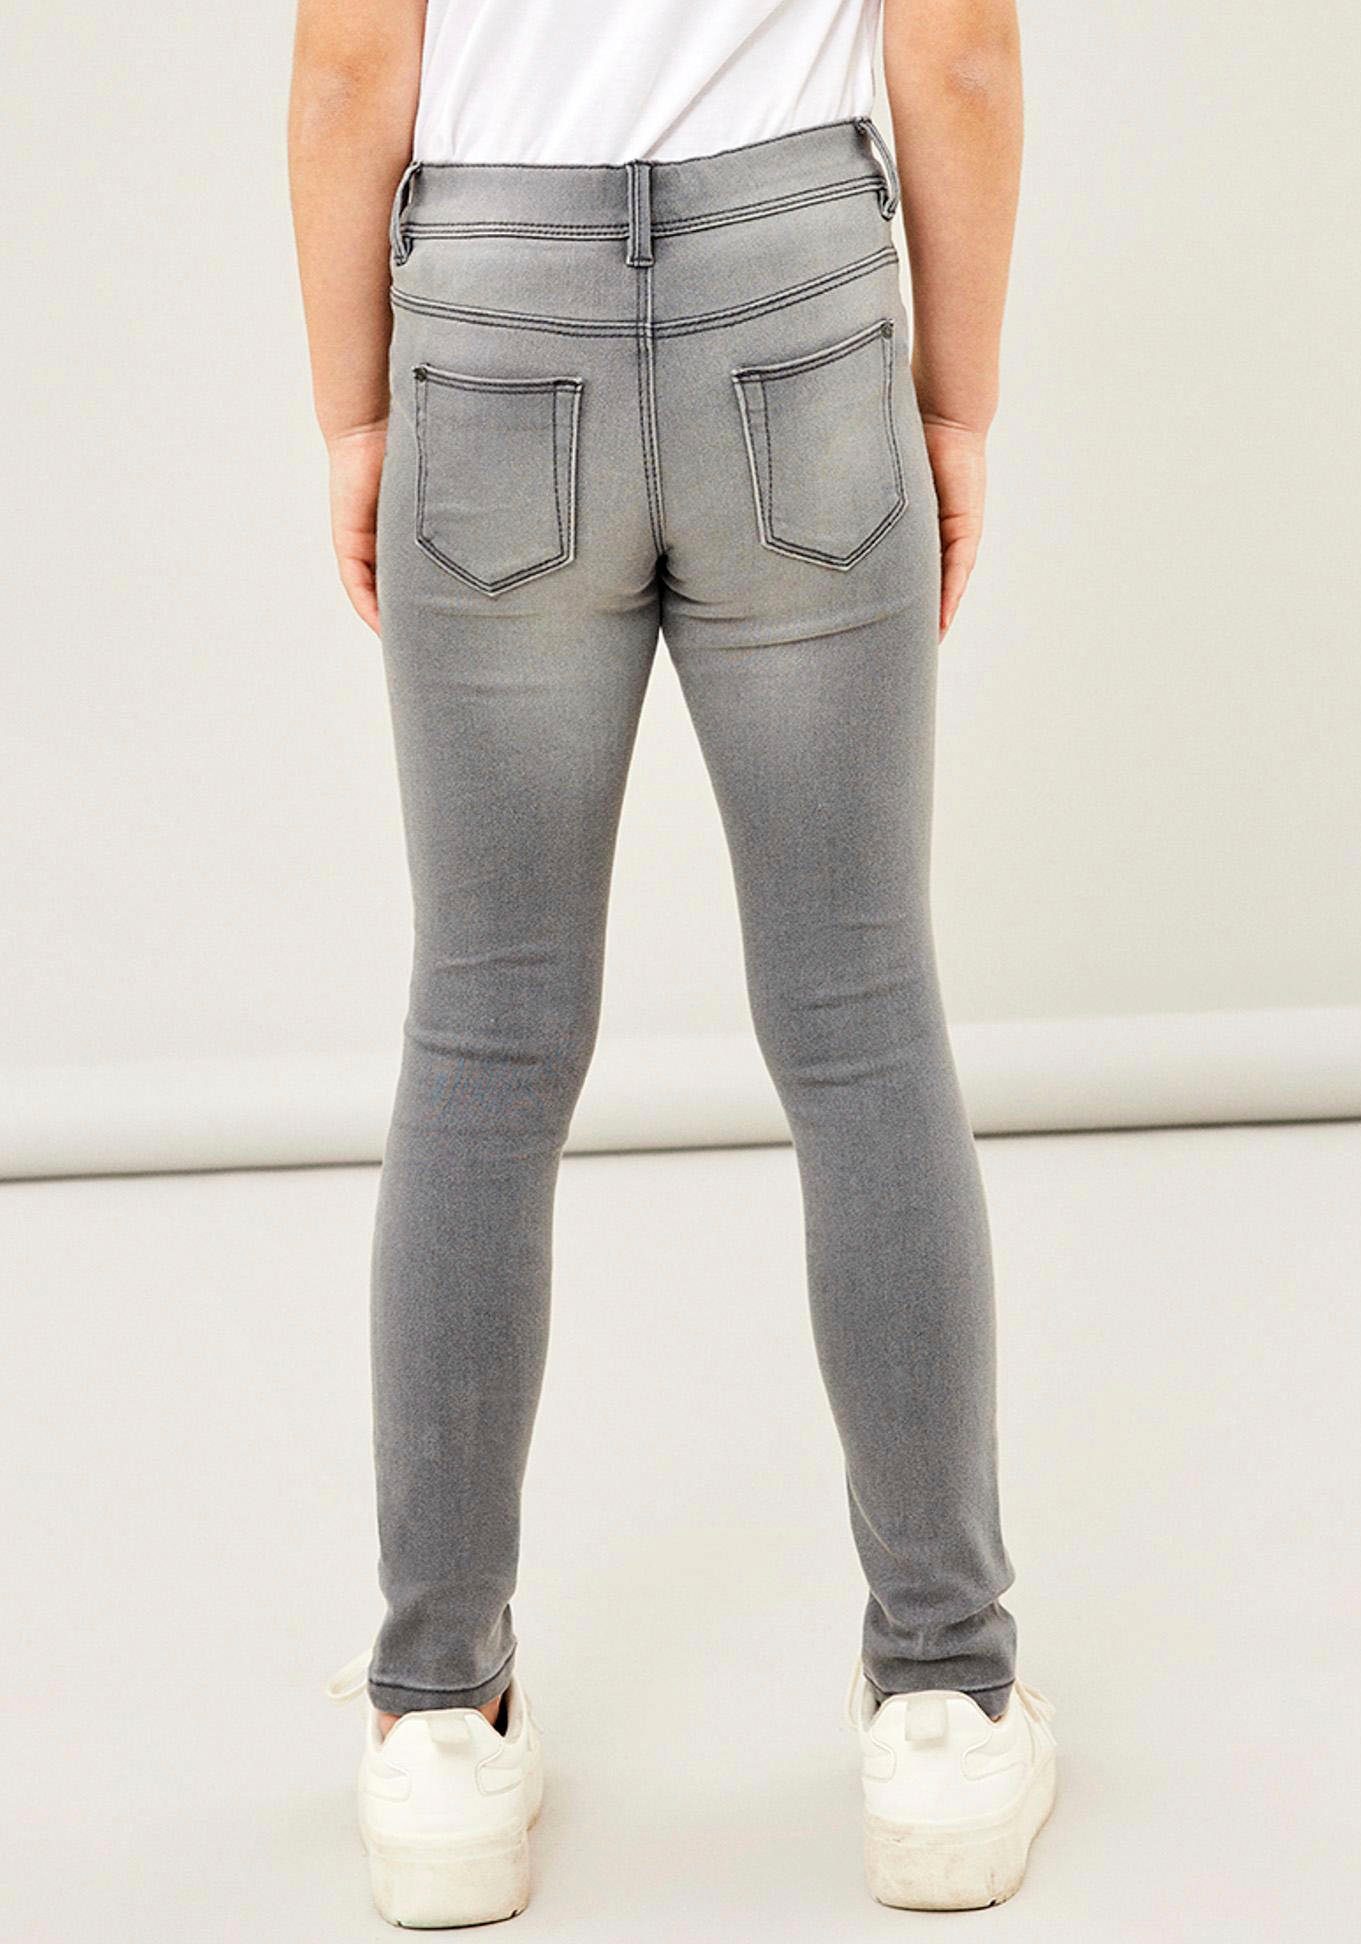 Name It Stretch-Jeans NKFPOLLY DNMTAX grey light PANT denim